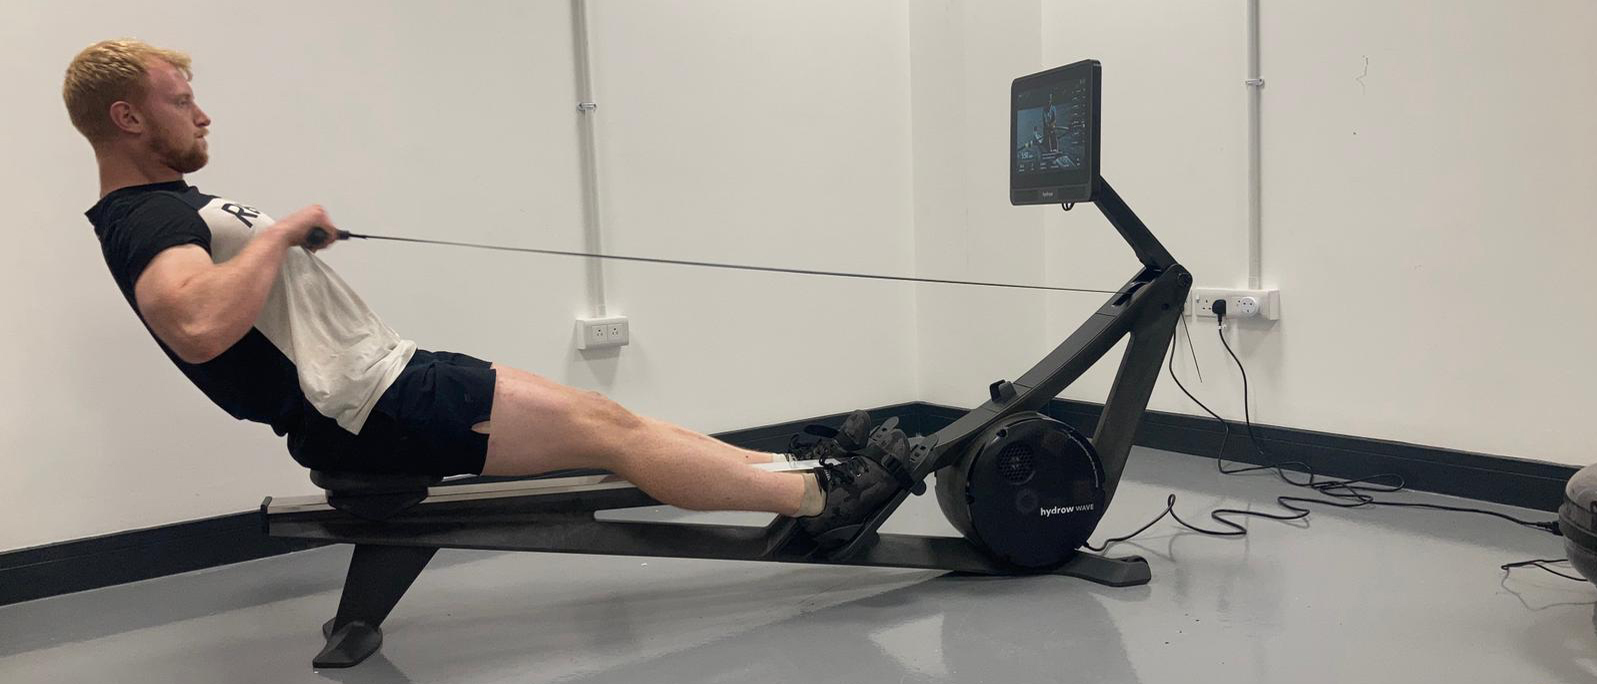 Hydrow Wave rowing machine being tested